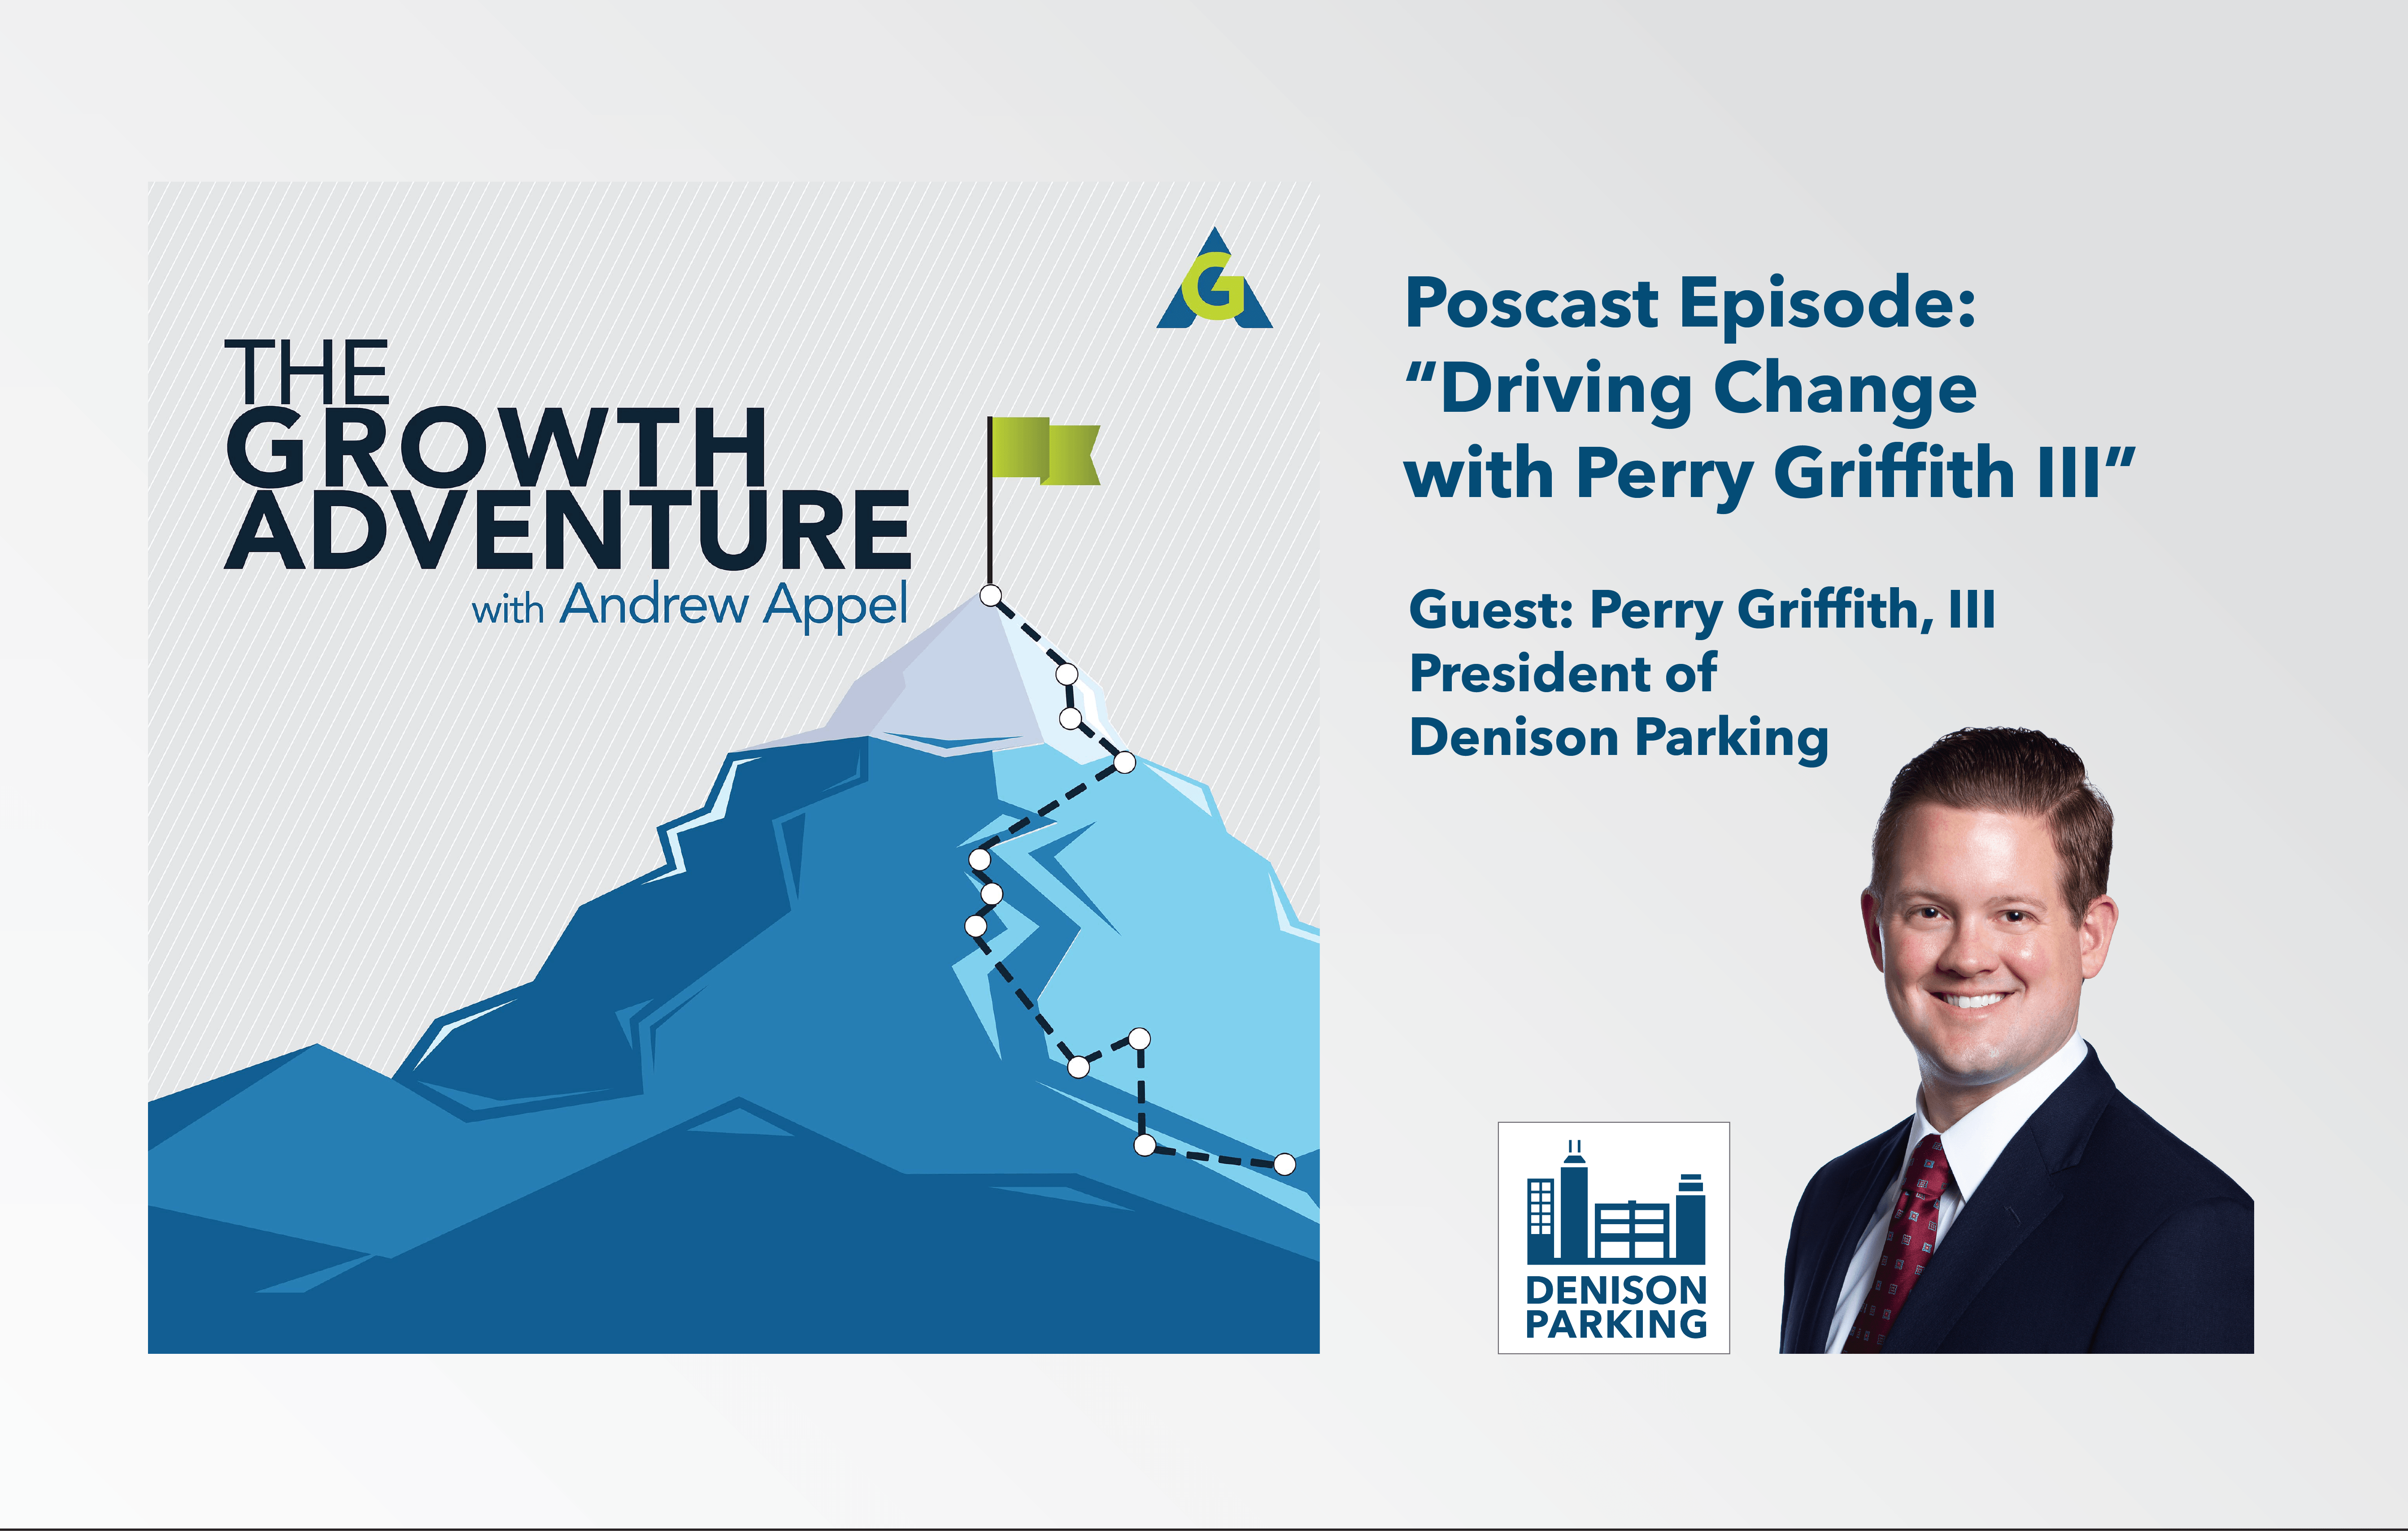 Driving Change with Perry Griffith III